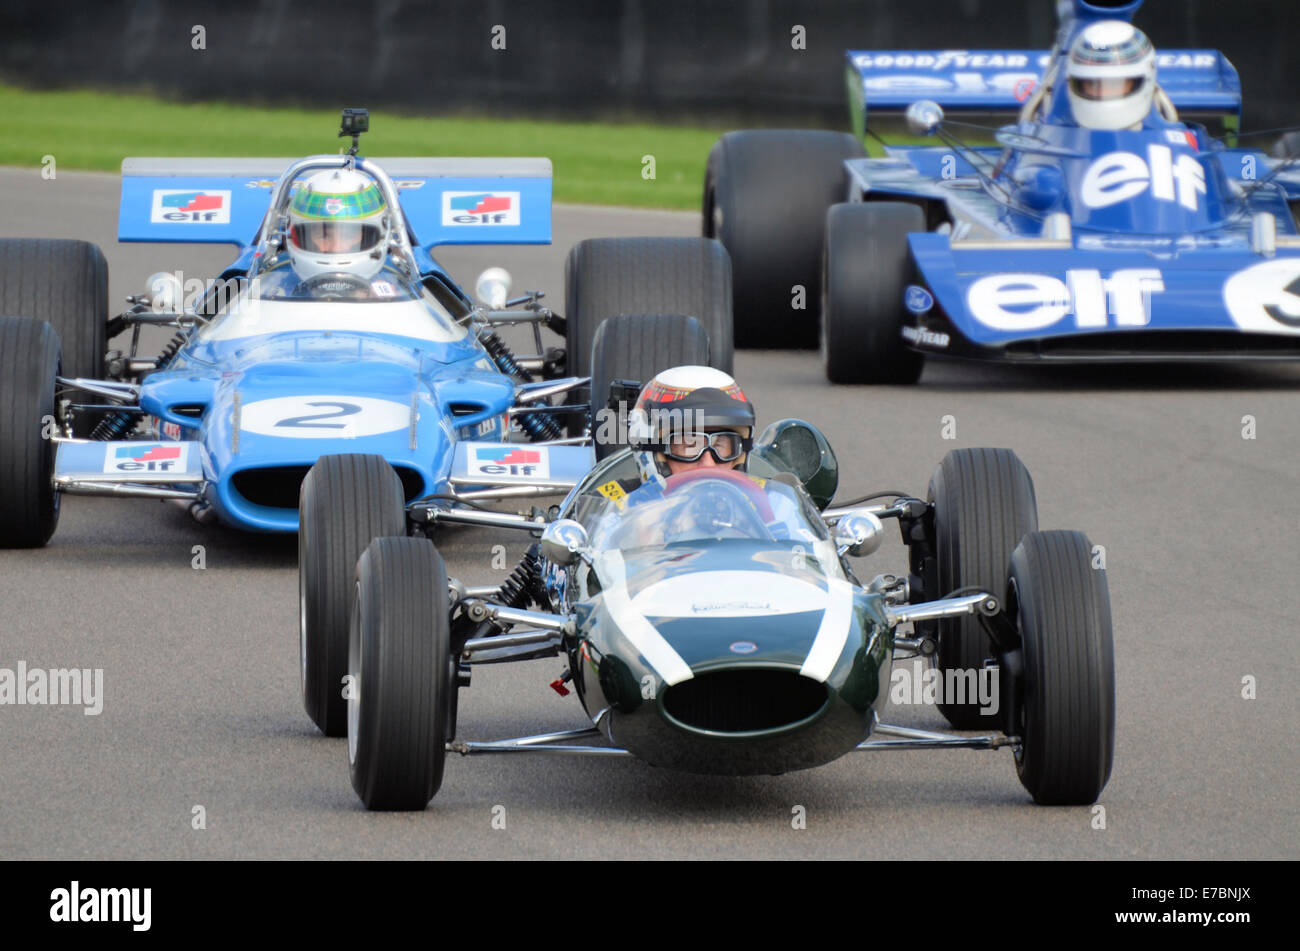 Sir Jackie Stewart led a number of his former racing cars around the track at the Goodwood Revival. Racing driver Stock Photo